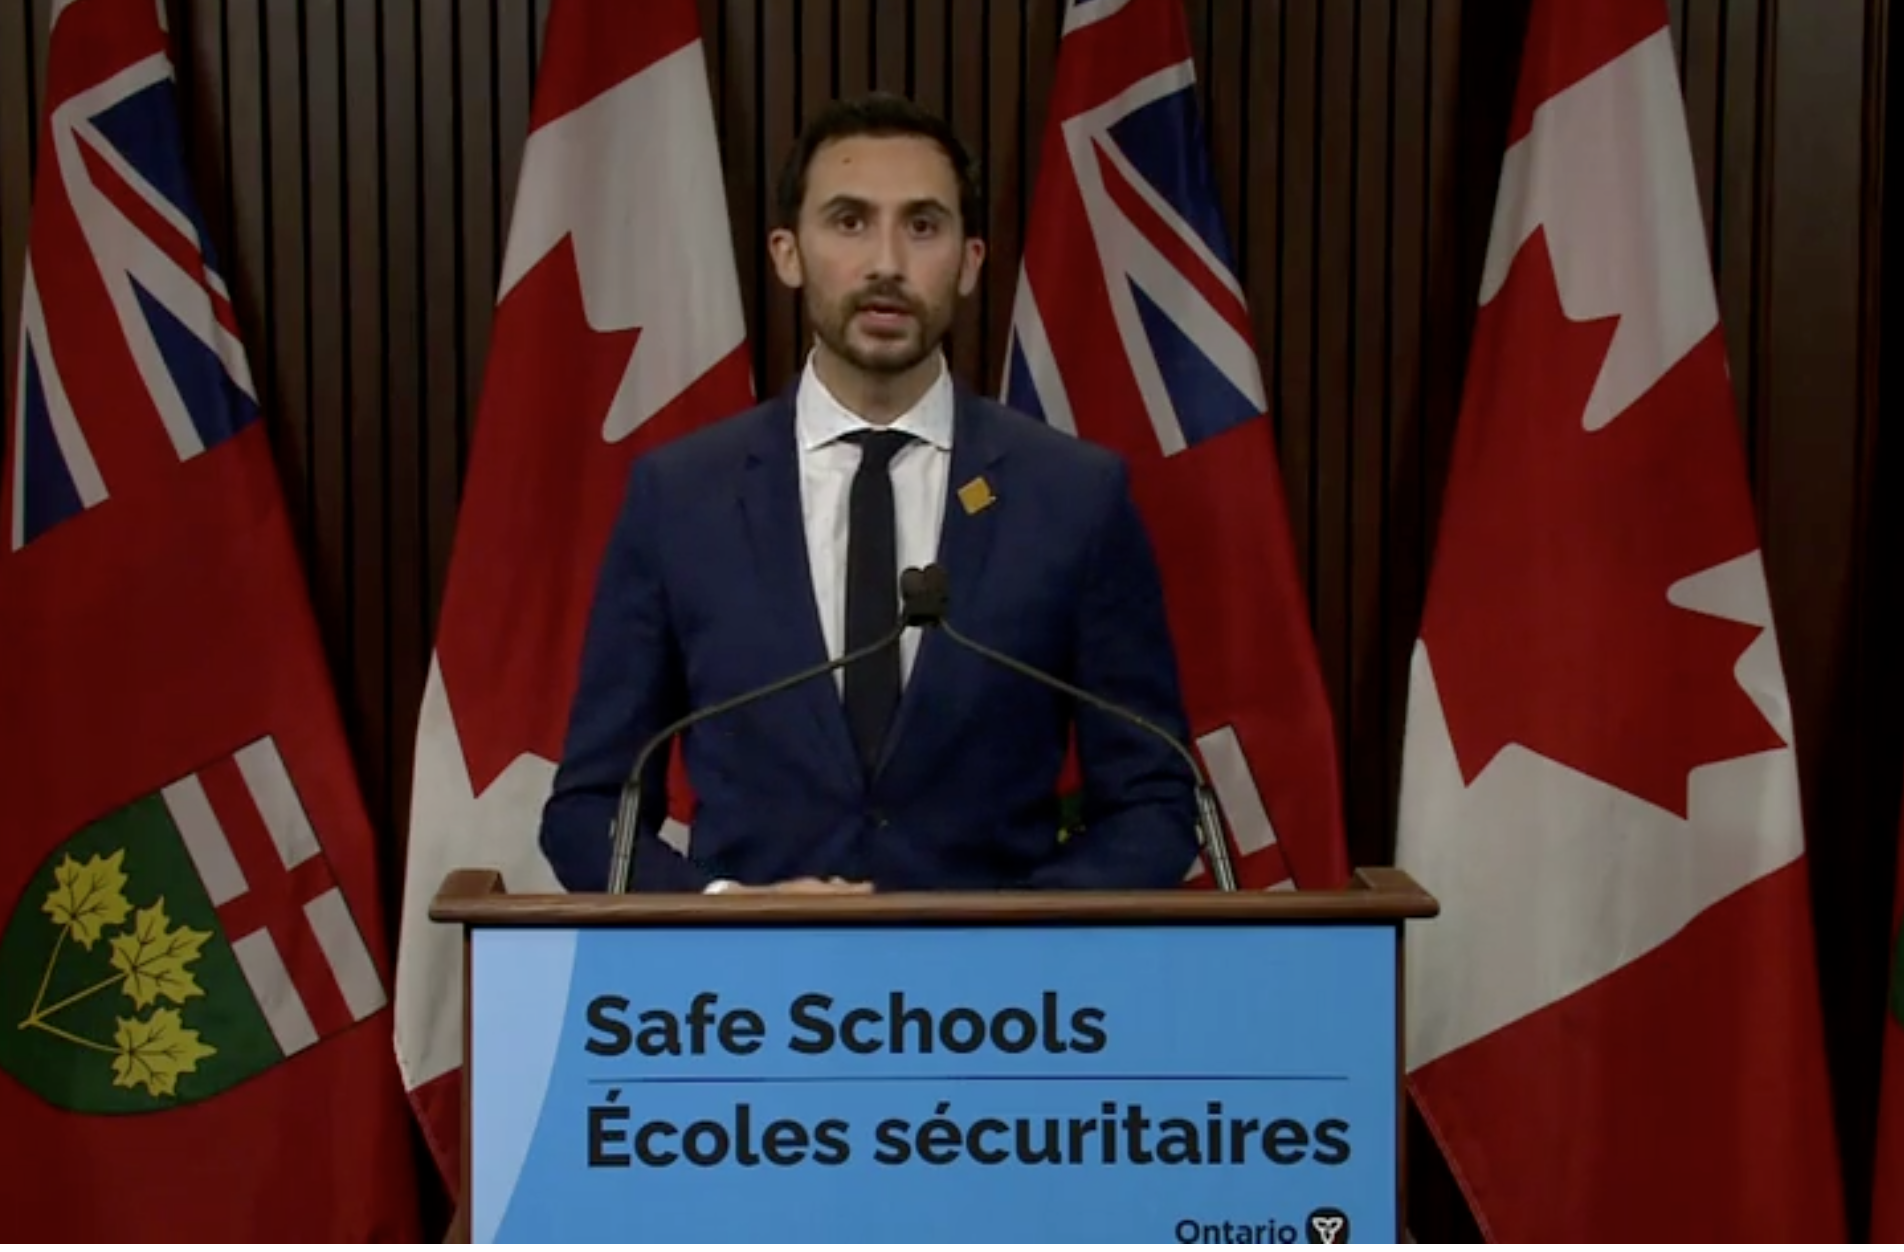 Education minister says asymptomatic testing target will improve safety in schools, but opposition says it’s ‘not adequate’